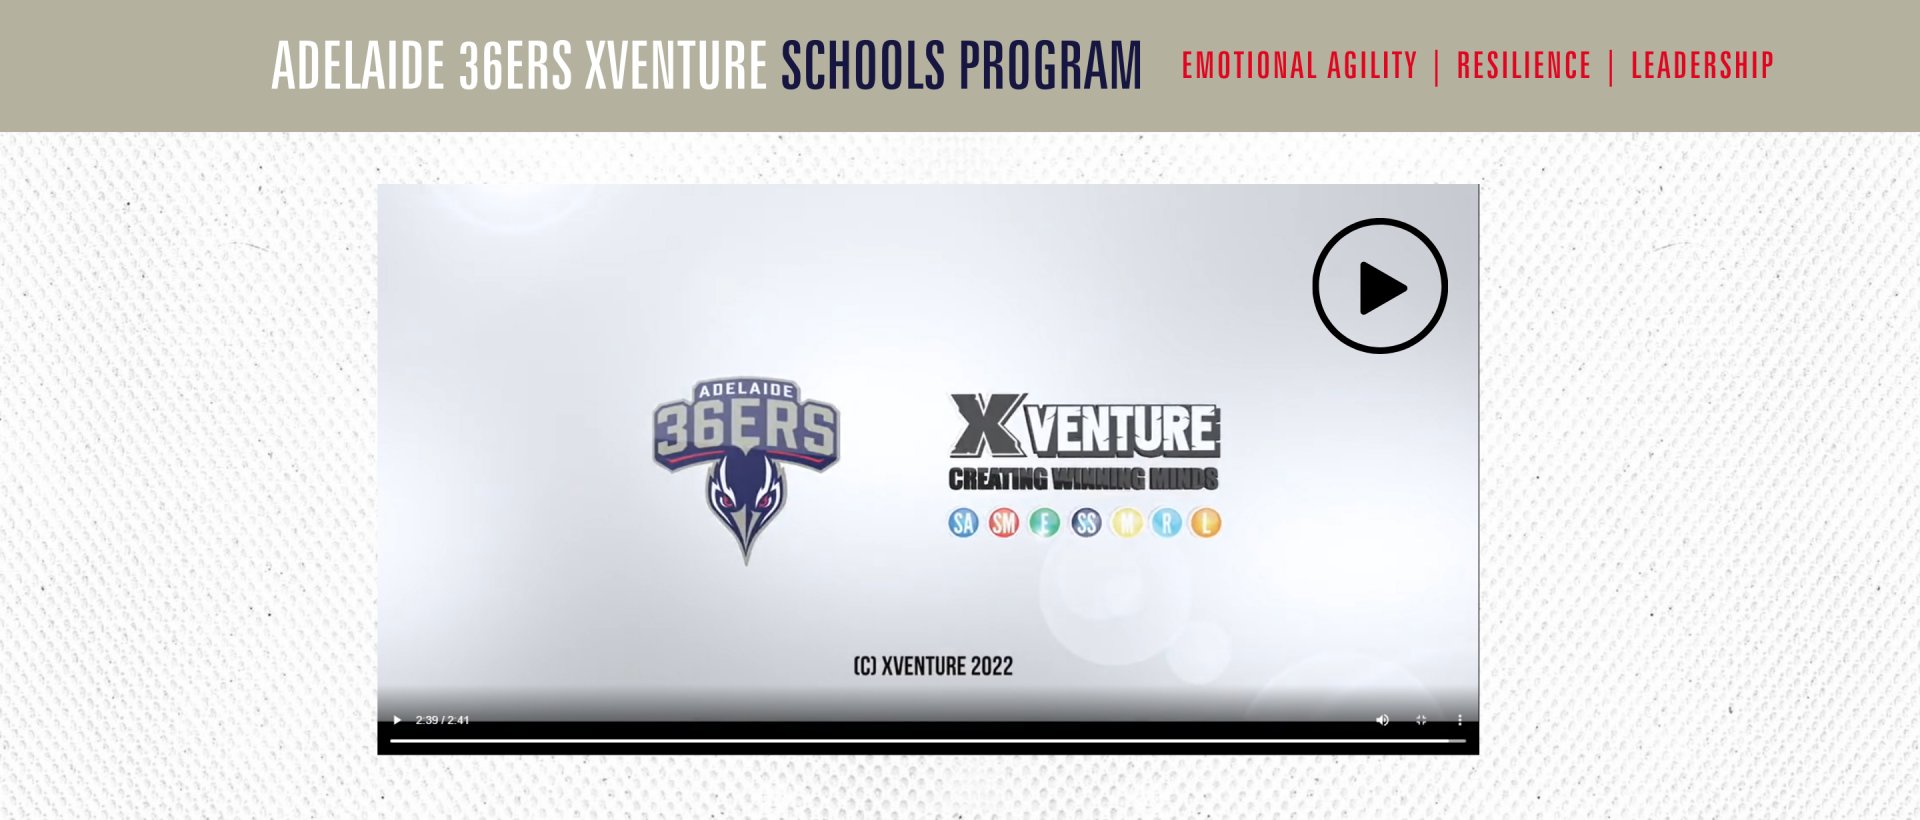 The Adelaide 36ers & Xventure Schools Program Is An Experiential Learning Program That Focusses On Emotional Agility, Resilience, And Leadership. The Program Aims To Equip Young People With Important Life S